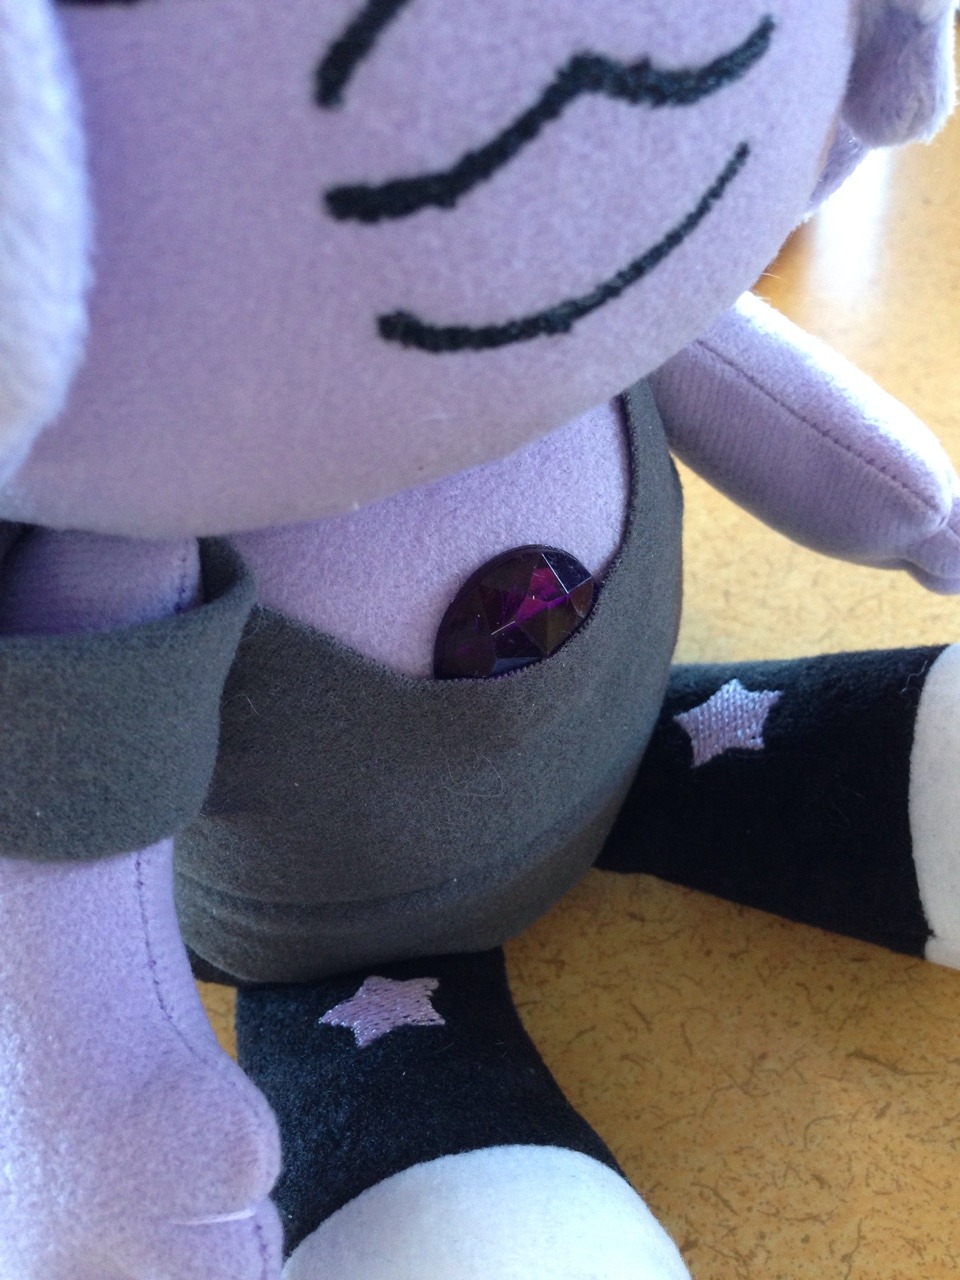 yamino:sowiddlefur:So I watched Steven Universe and I feel the need to plush the